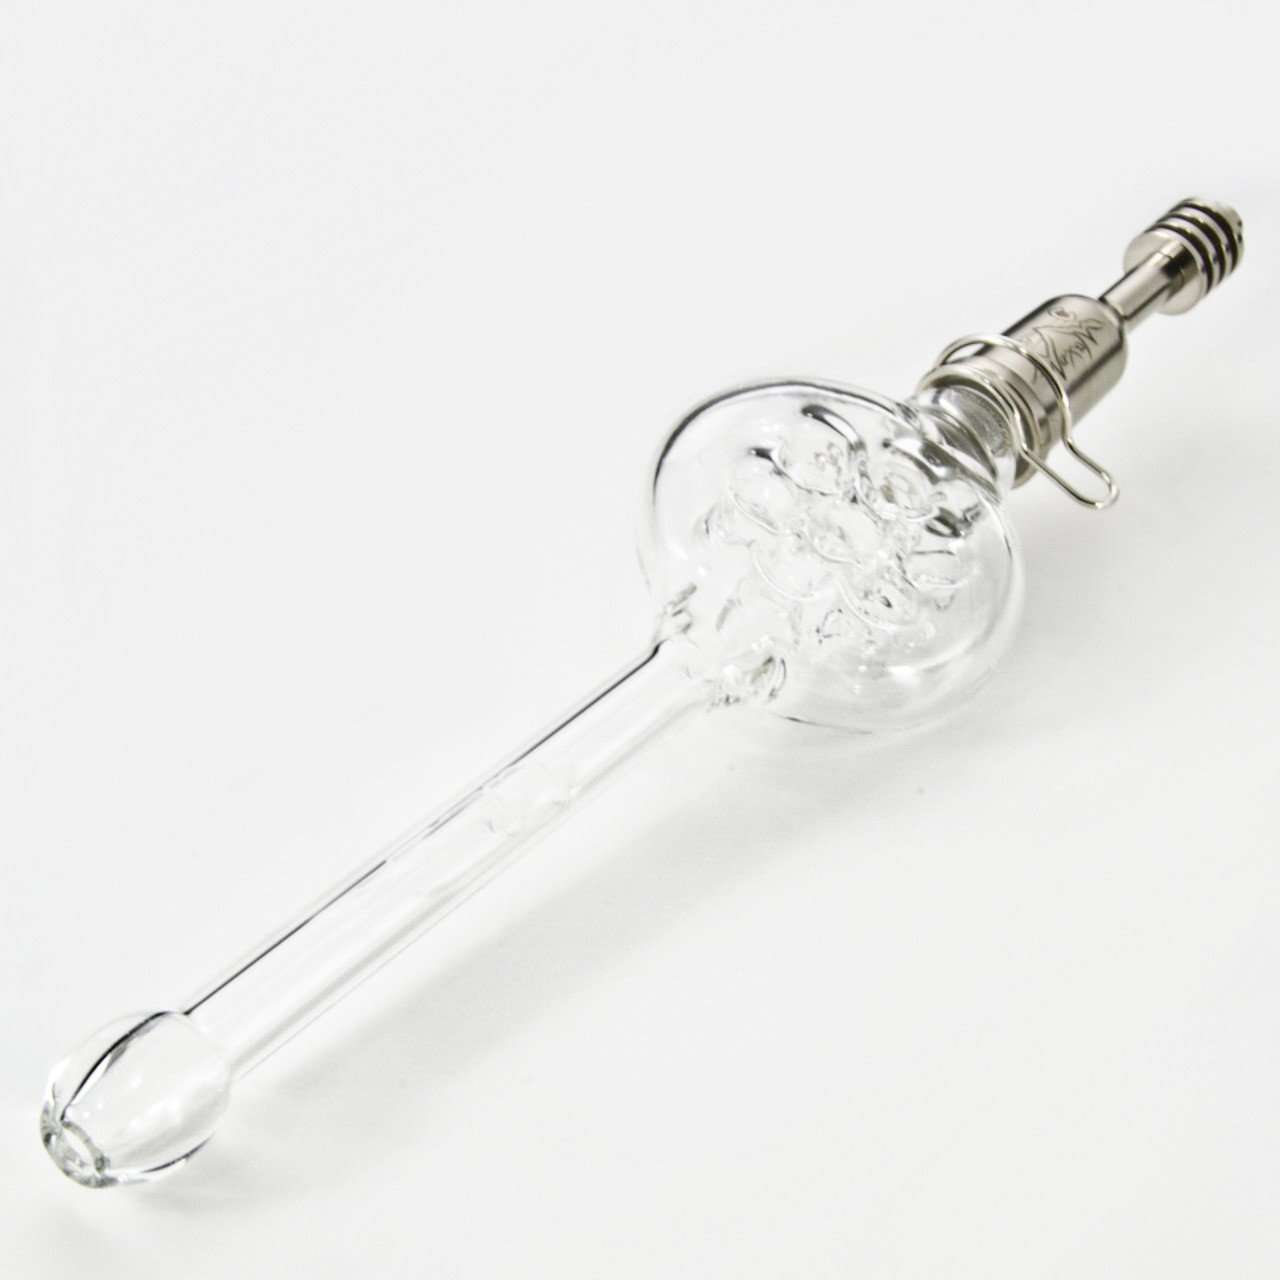 Honeycomb  Dab Straw or Nectar Collector